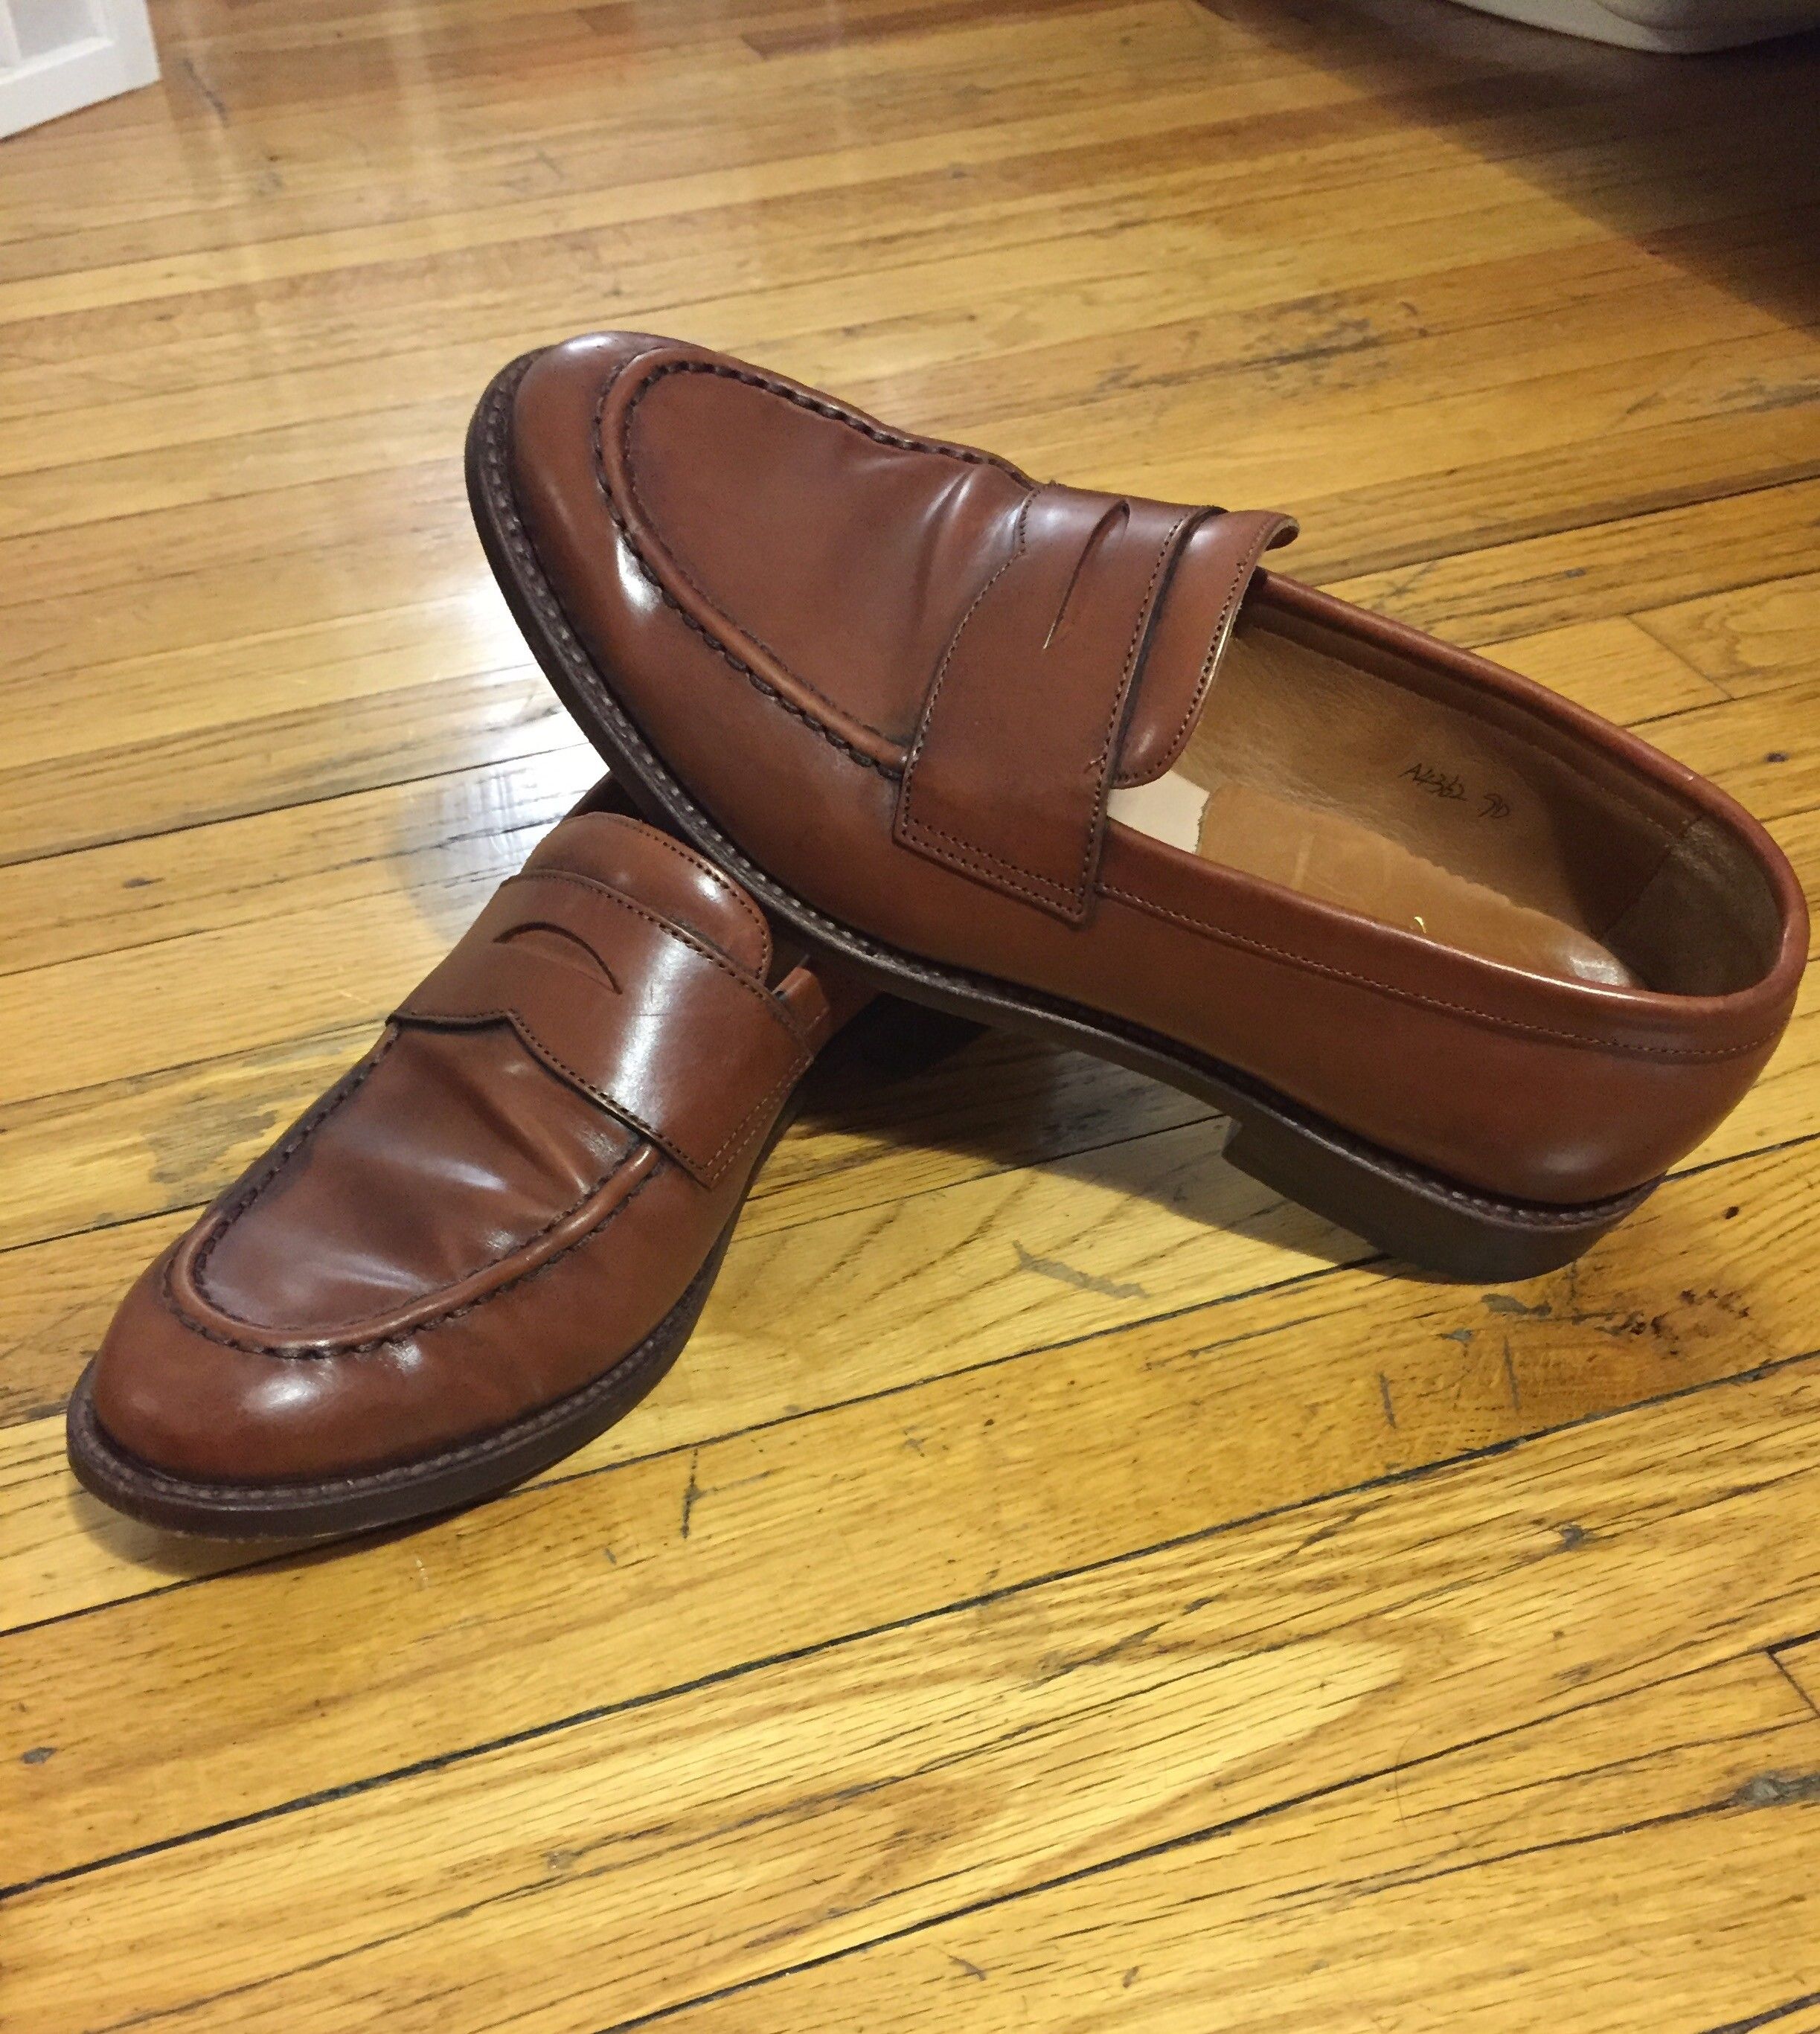 J.Crew Ludlow Penny Loafer (English Tan) Size US 9 / EU 42 - 1 Preview